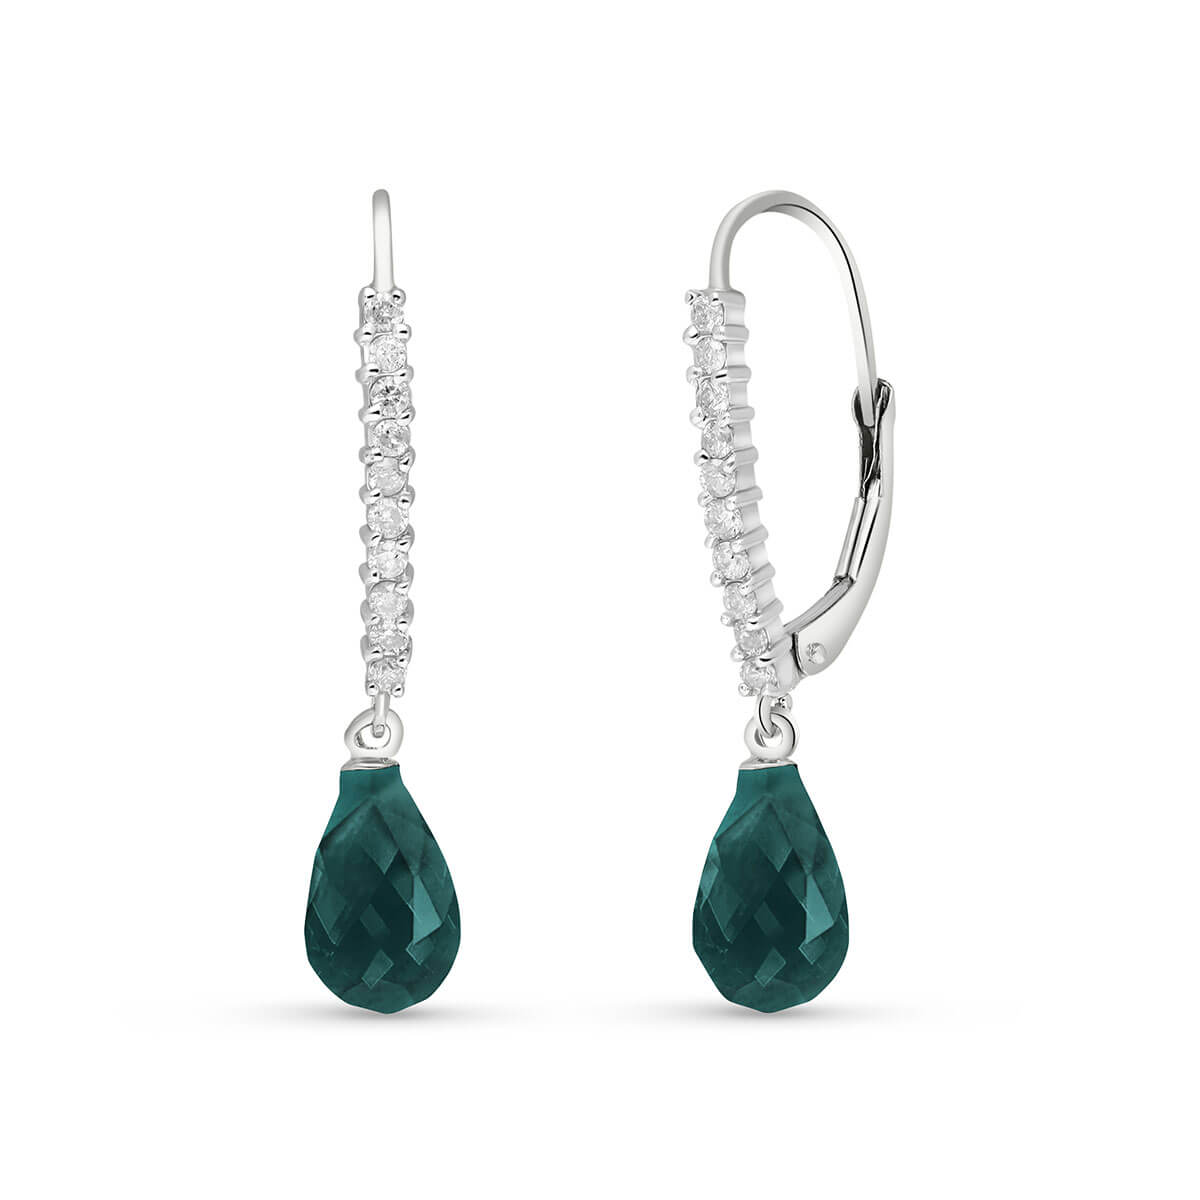 Diamond & Emerald Laced Stem Drop Earrings in 9ct White Gold